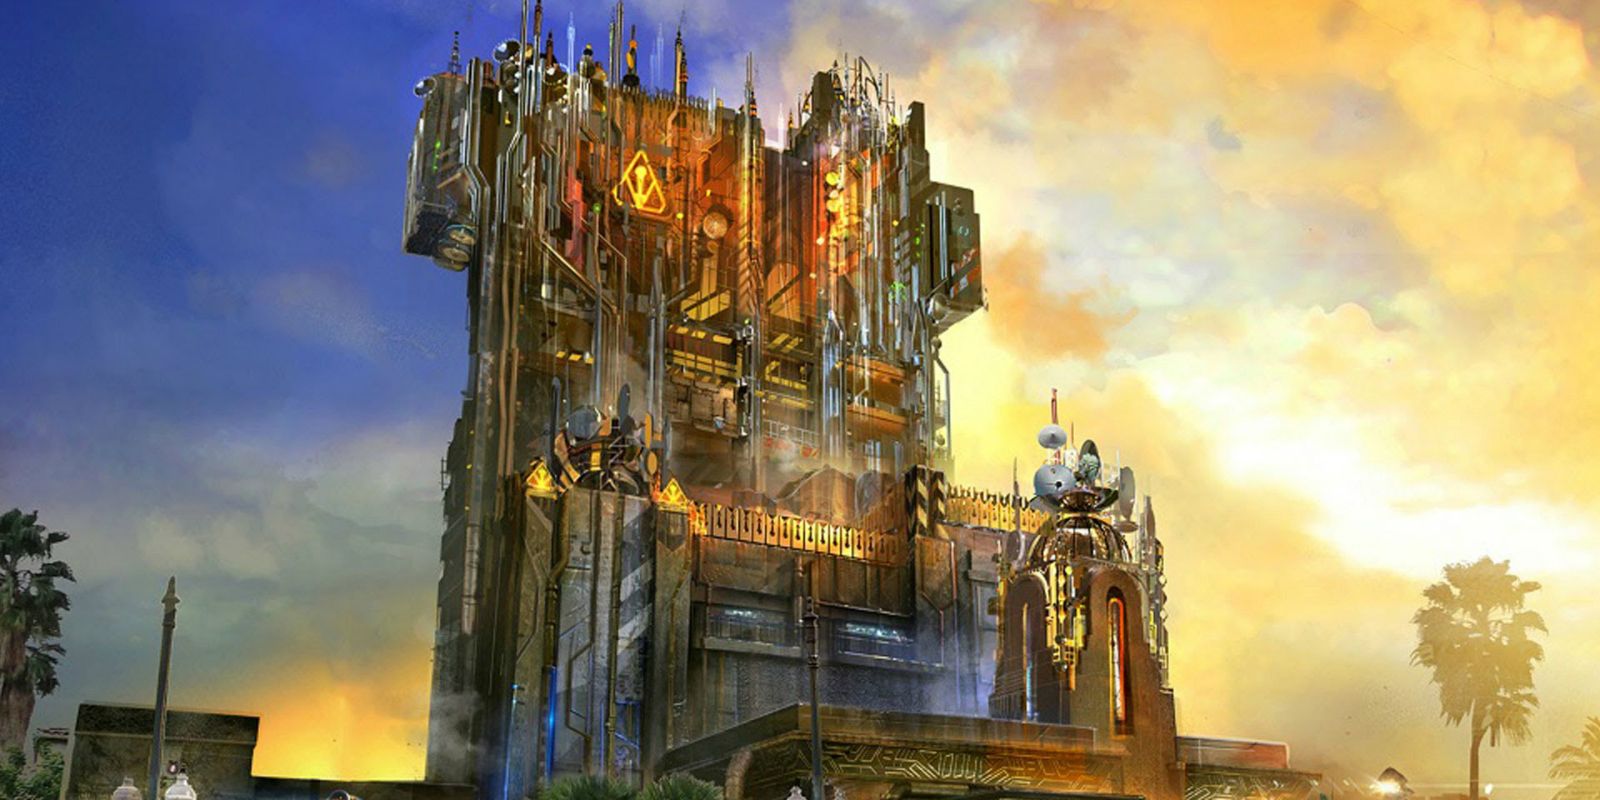 Guardians of the Galaxy Mission Breakout Begins Construction